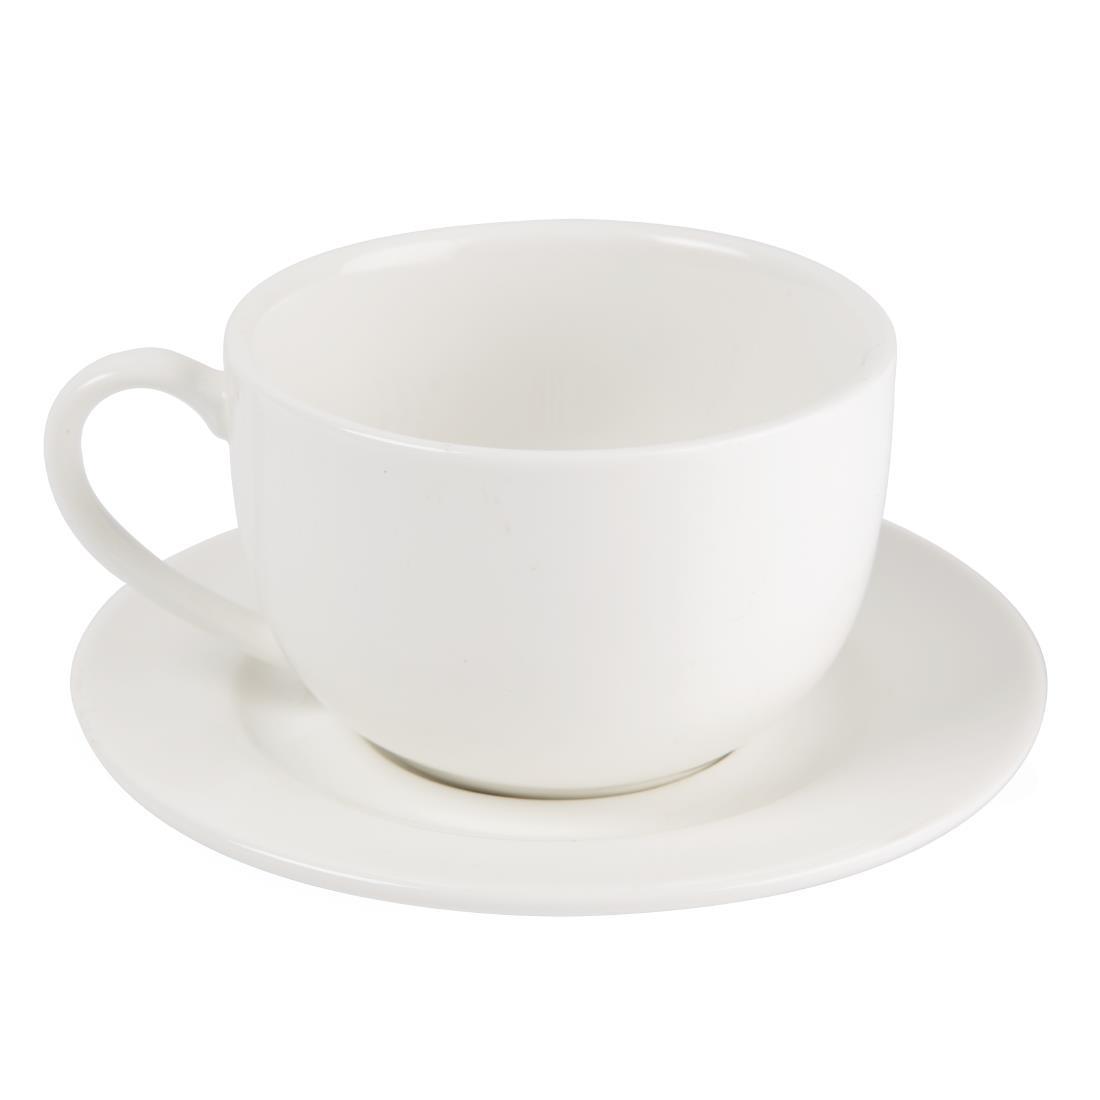 Olympia Lumina Low Round Espresso Cups 120ml 4oz (Pack of 6) - CD643  - 3